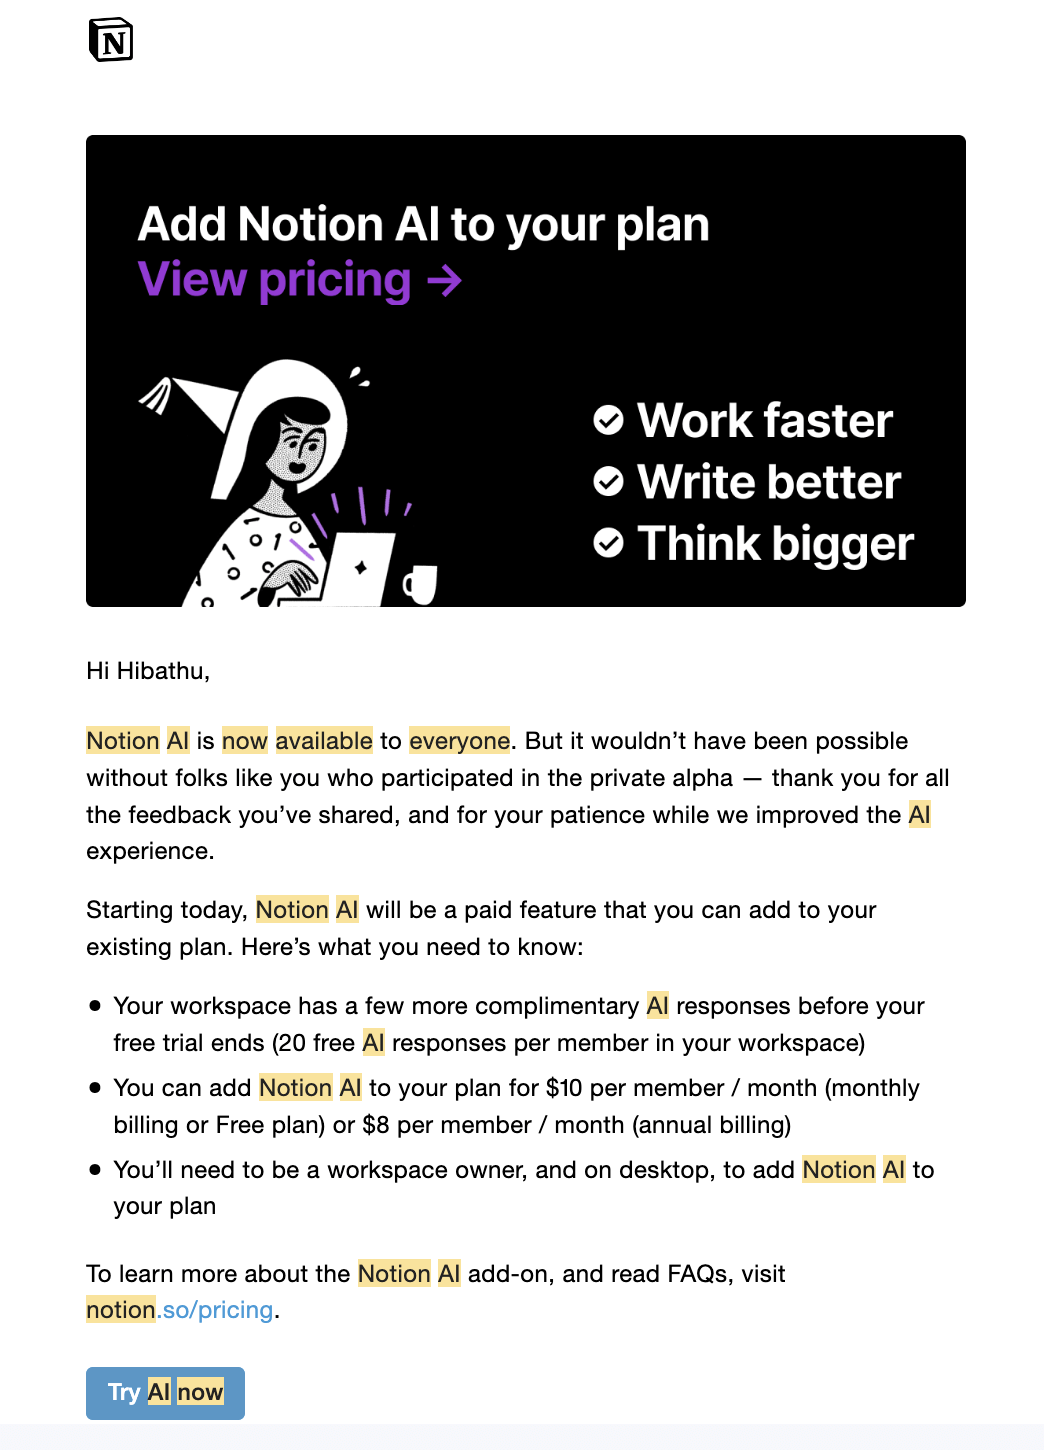 SaaS Waitlist Emails: Screenshot of Notion's email about their pricing when you add AI to your plan.